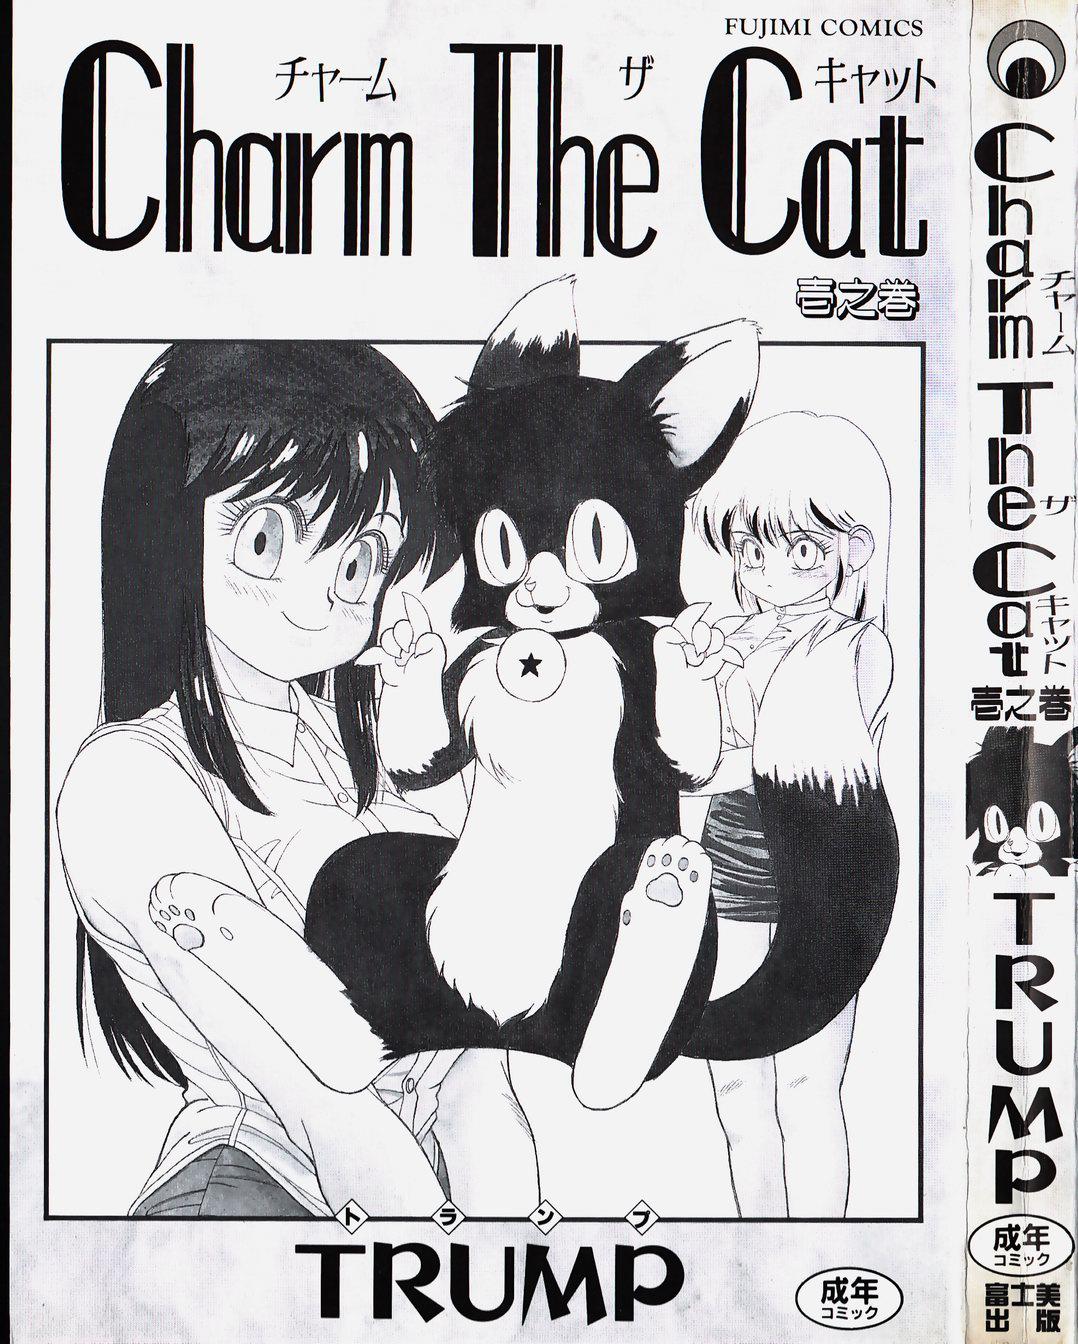 Charm The Cat 2